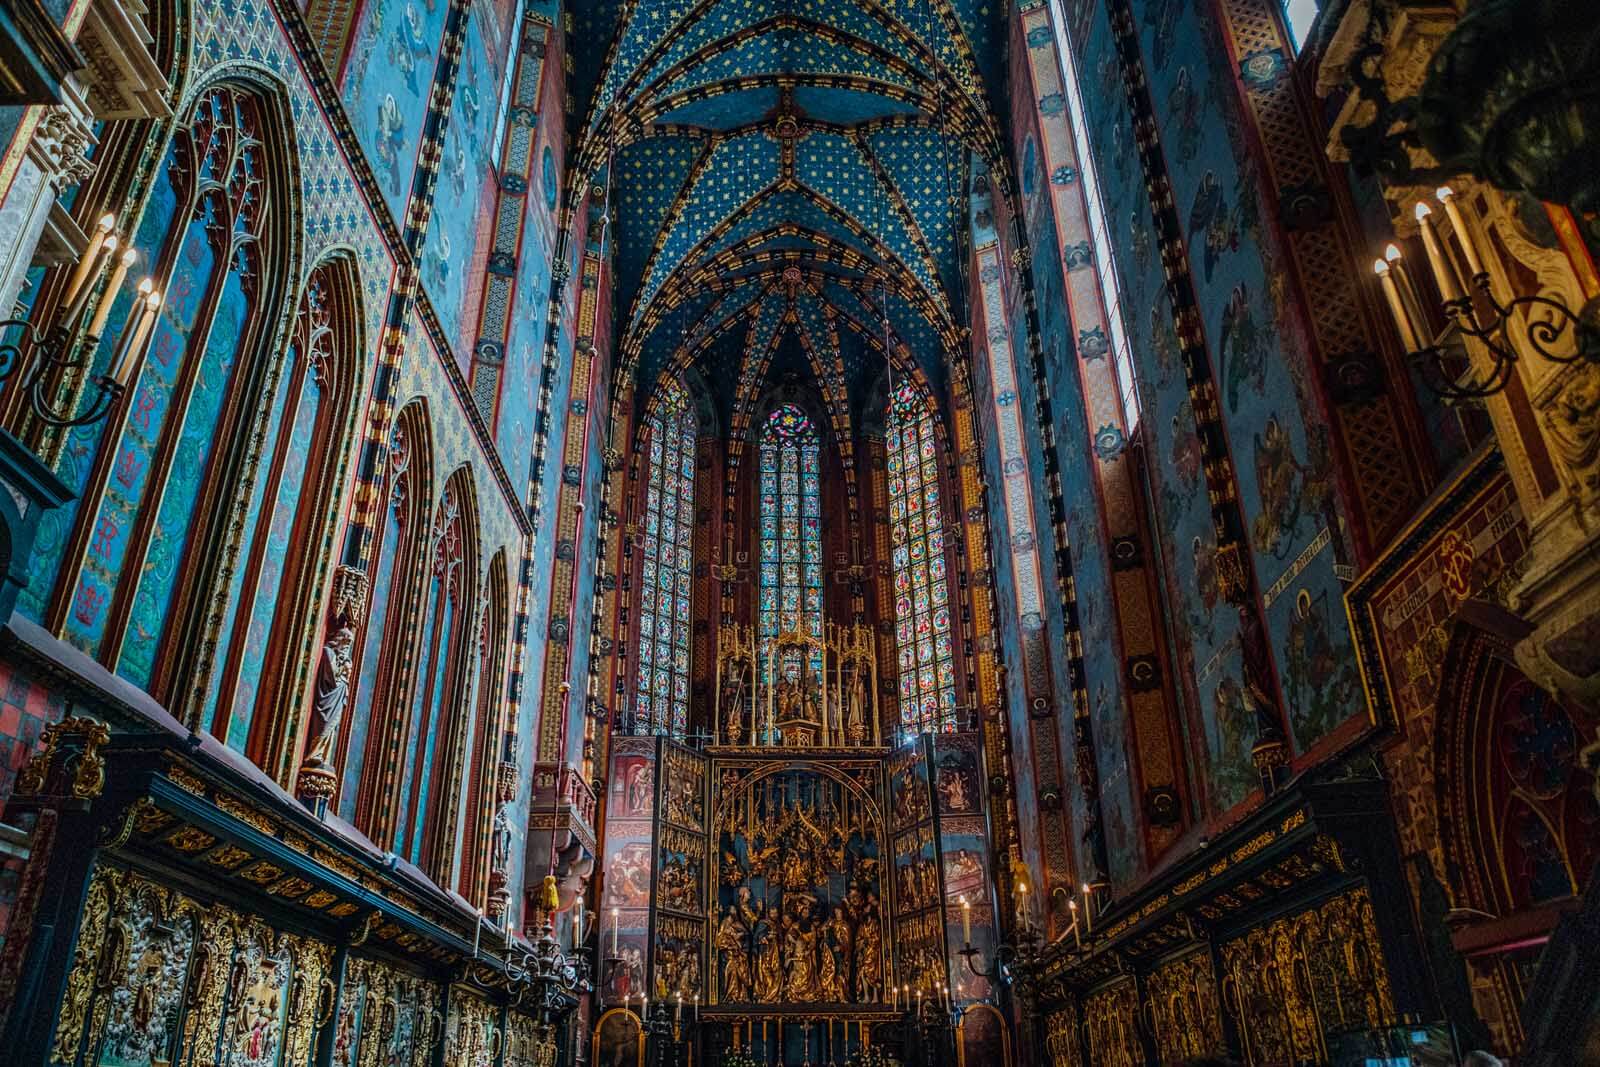 The gorgeous inside of St. Mary’s Basilica in Krakow